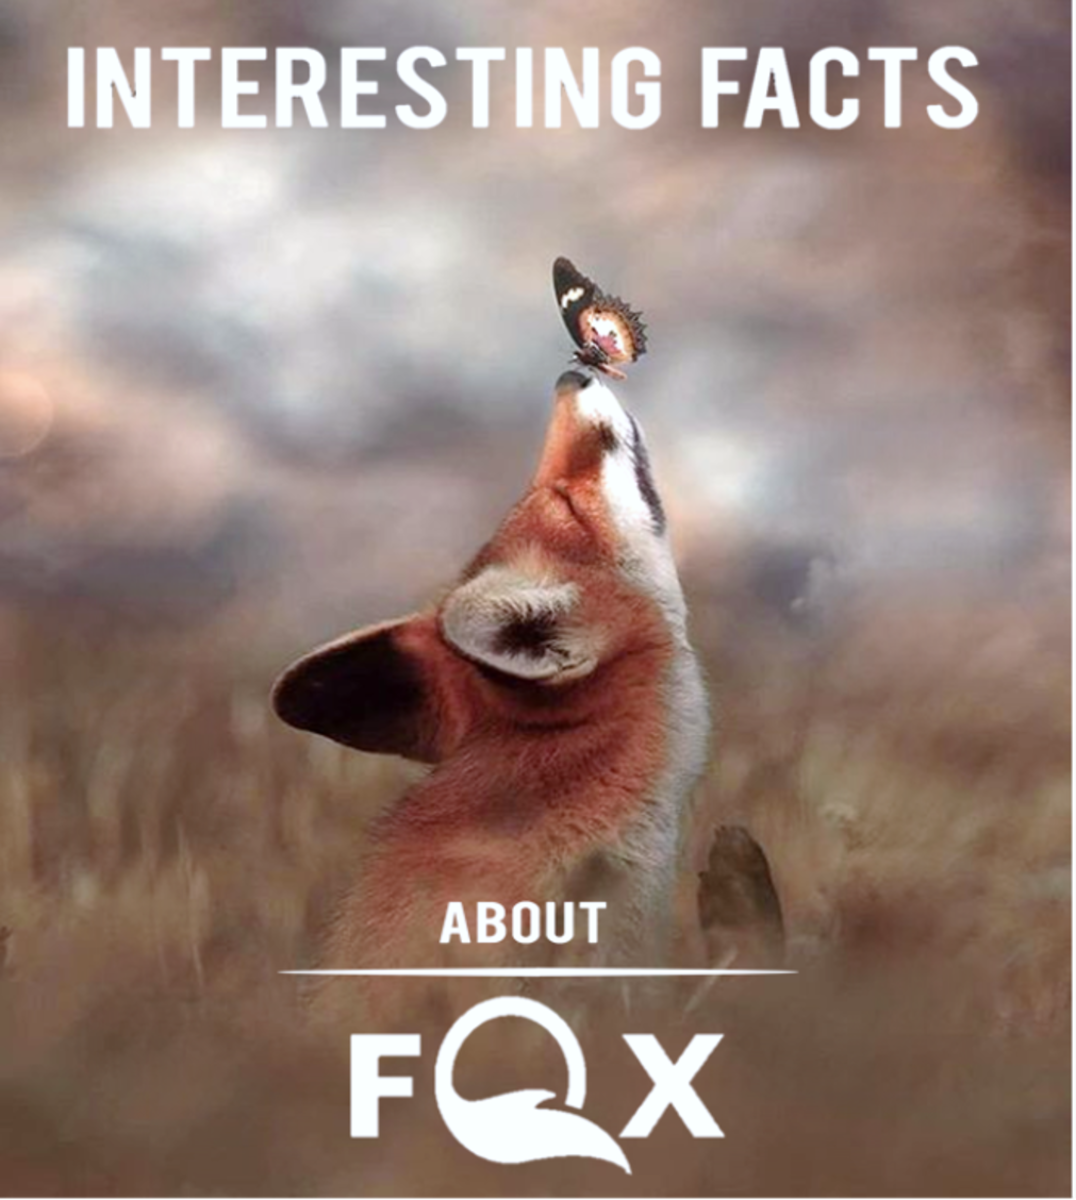 The 25 Interesting Facts About foxes